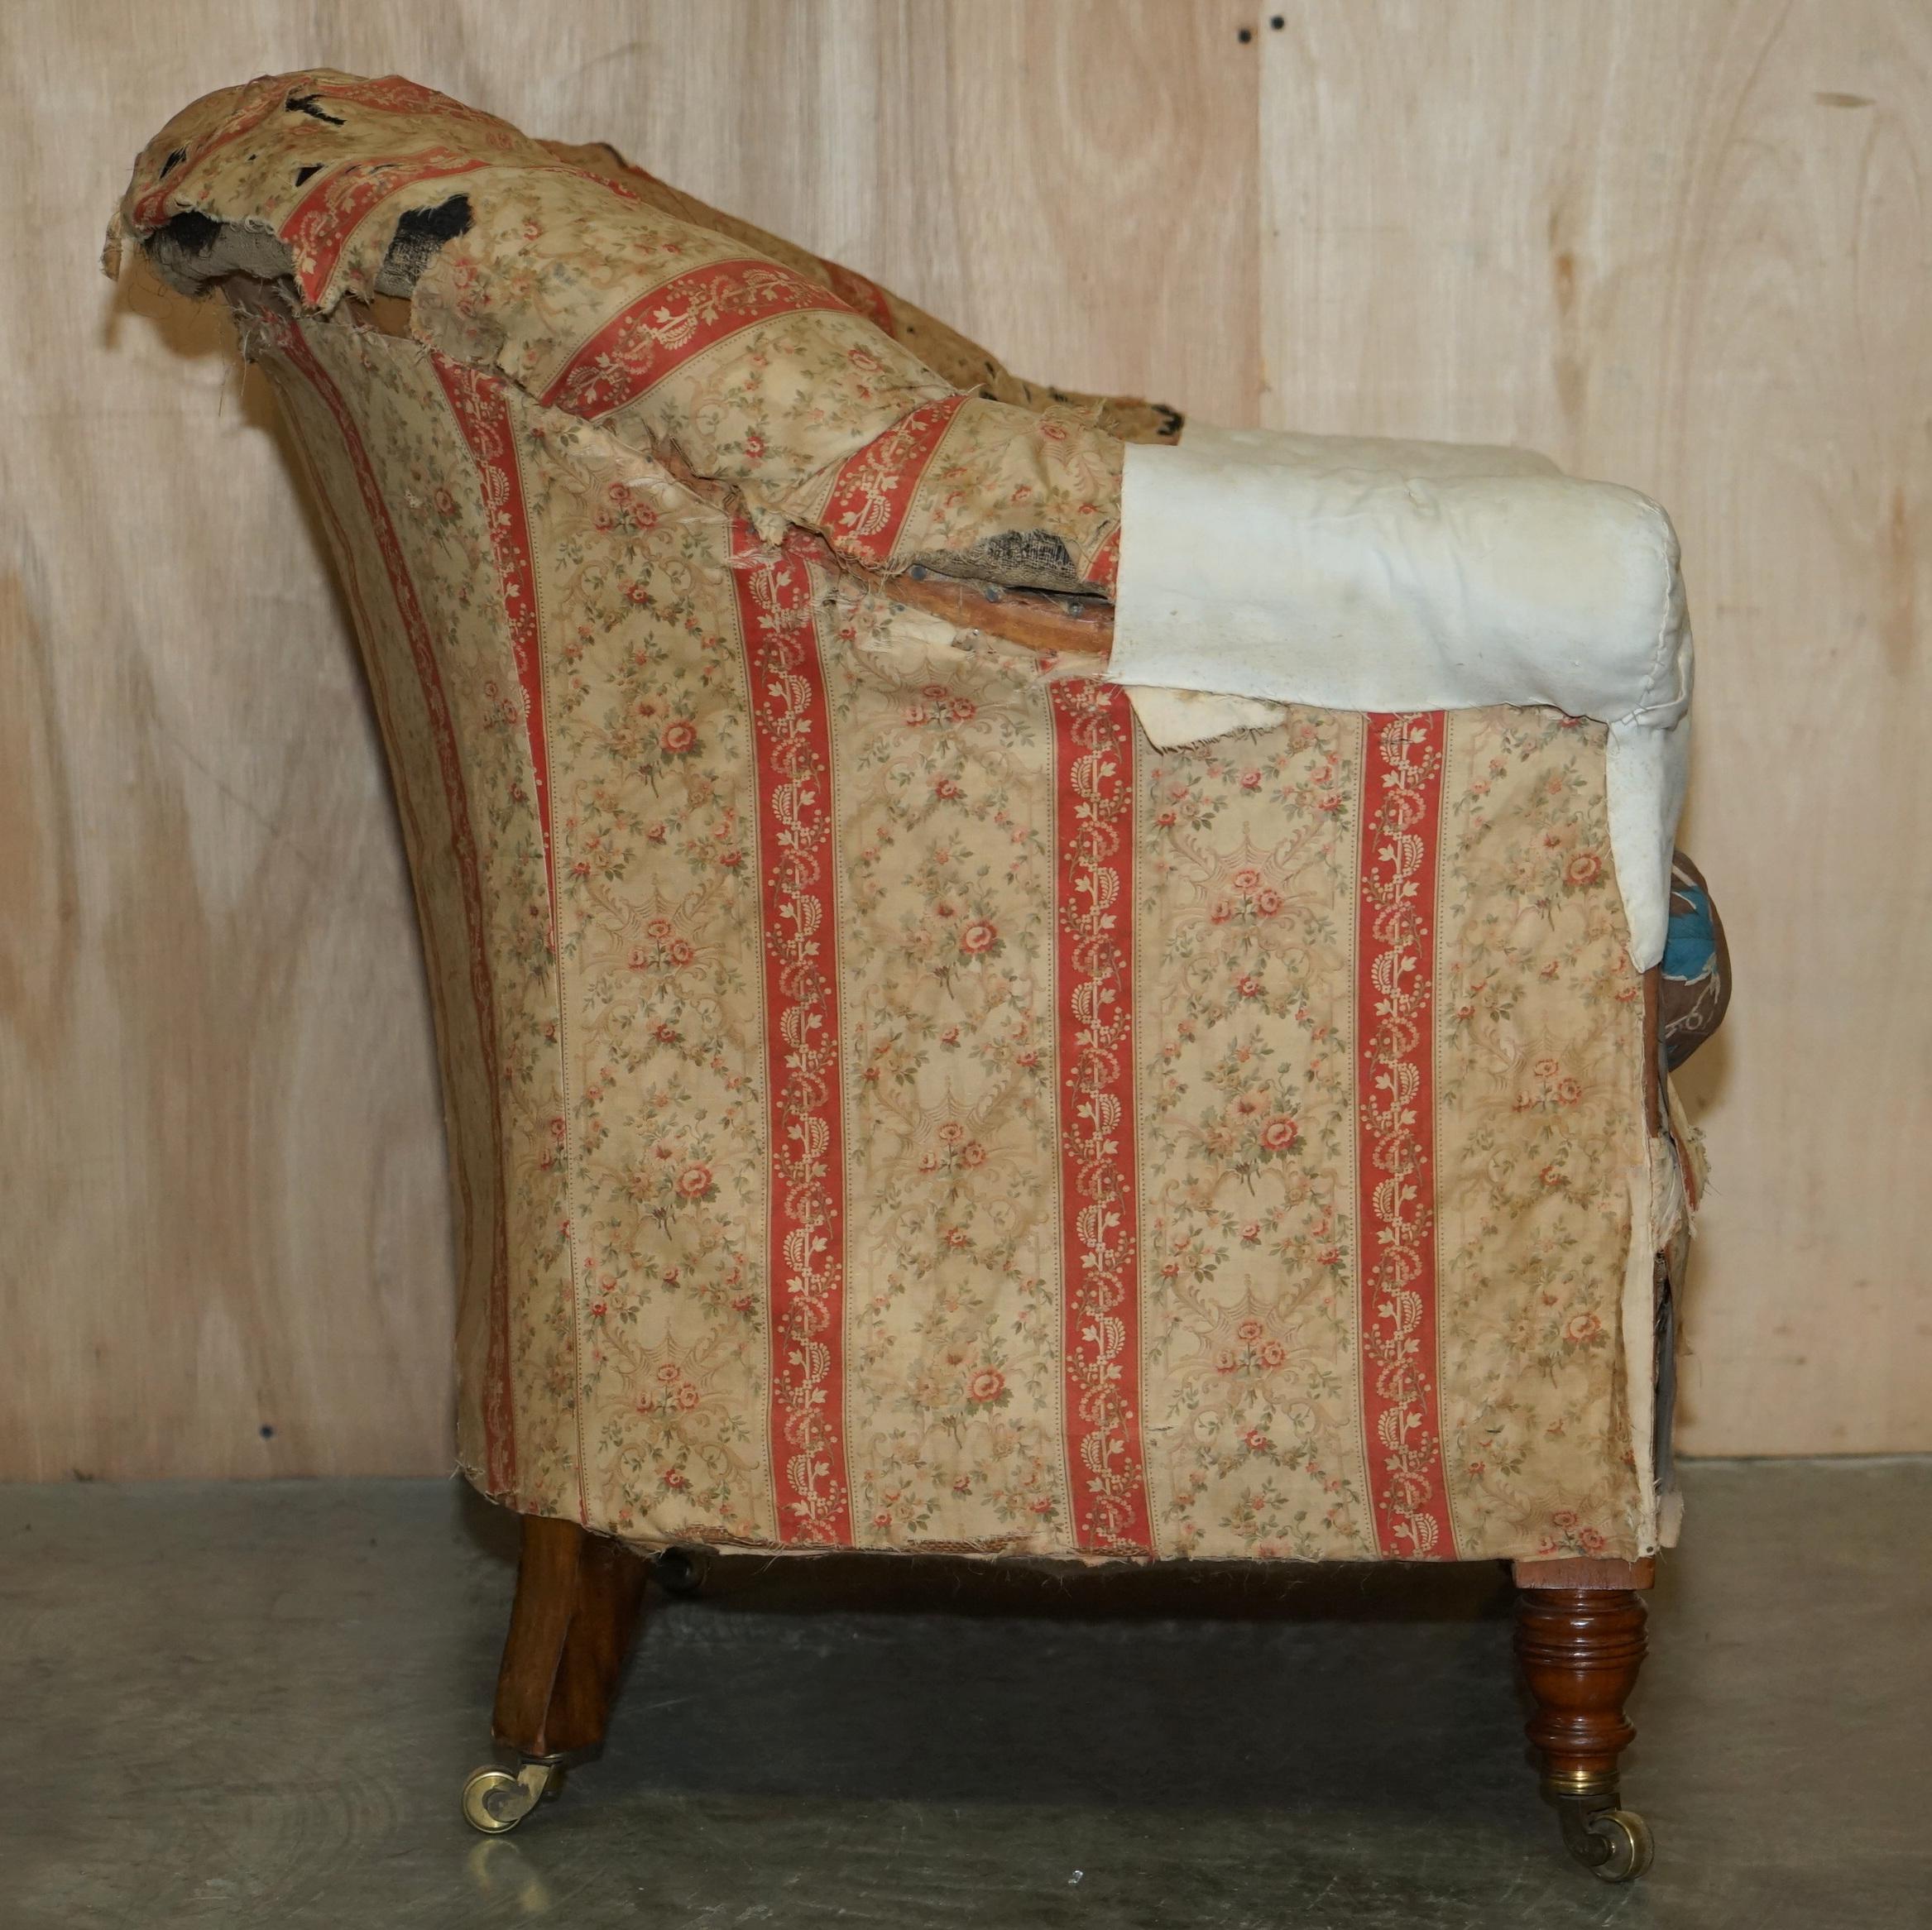 Upholstery Pair of Antique Original Ticking Fabric Howard & Son's Chesterfield Armchairs For Sale